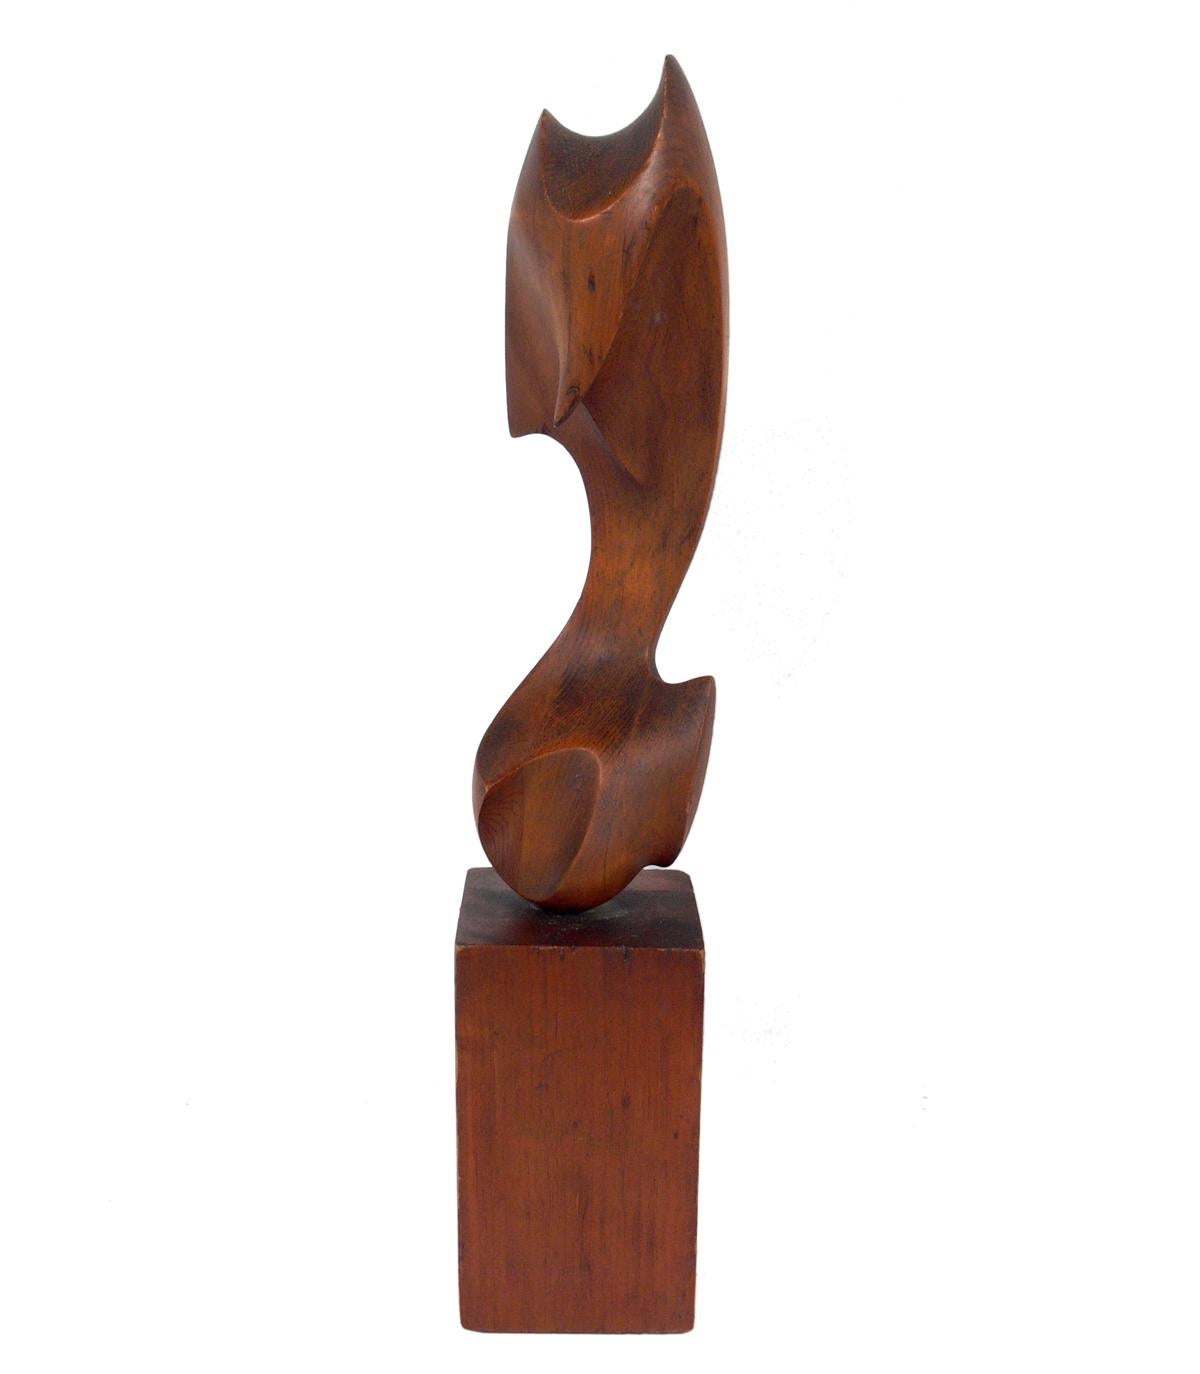 Selection of large abstract wood sculptures, circa 1960s. From left to right, the sculptures measure 25.5